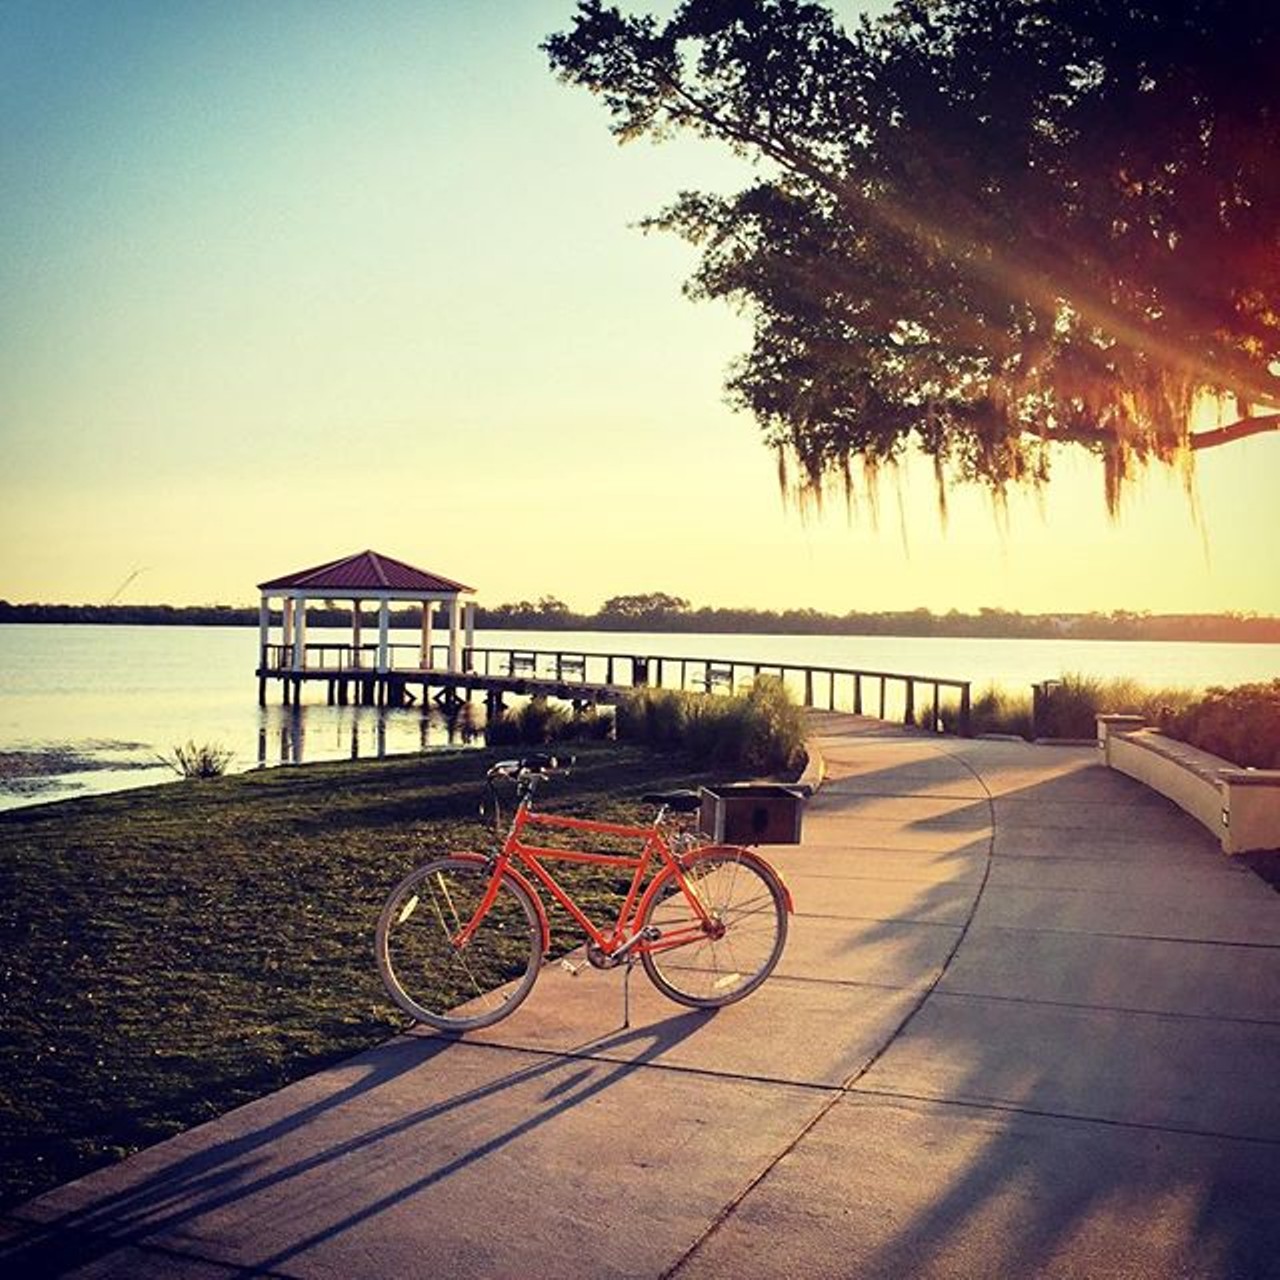 Bike around Lake Baldwin Park
2000 S. Lakemont Ave., Winter Park, FL, 407-599-3334
This park is perfect spot for you and your date to relax and enjoy a lazy weekend. Plus, it&#146;s dog-friendly.
Photo via fischapryce_1354/Instagram